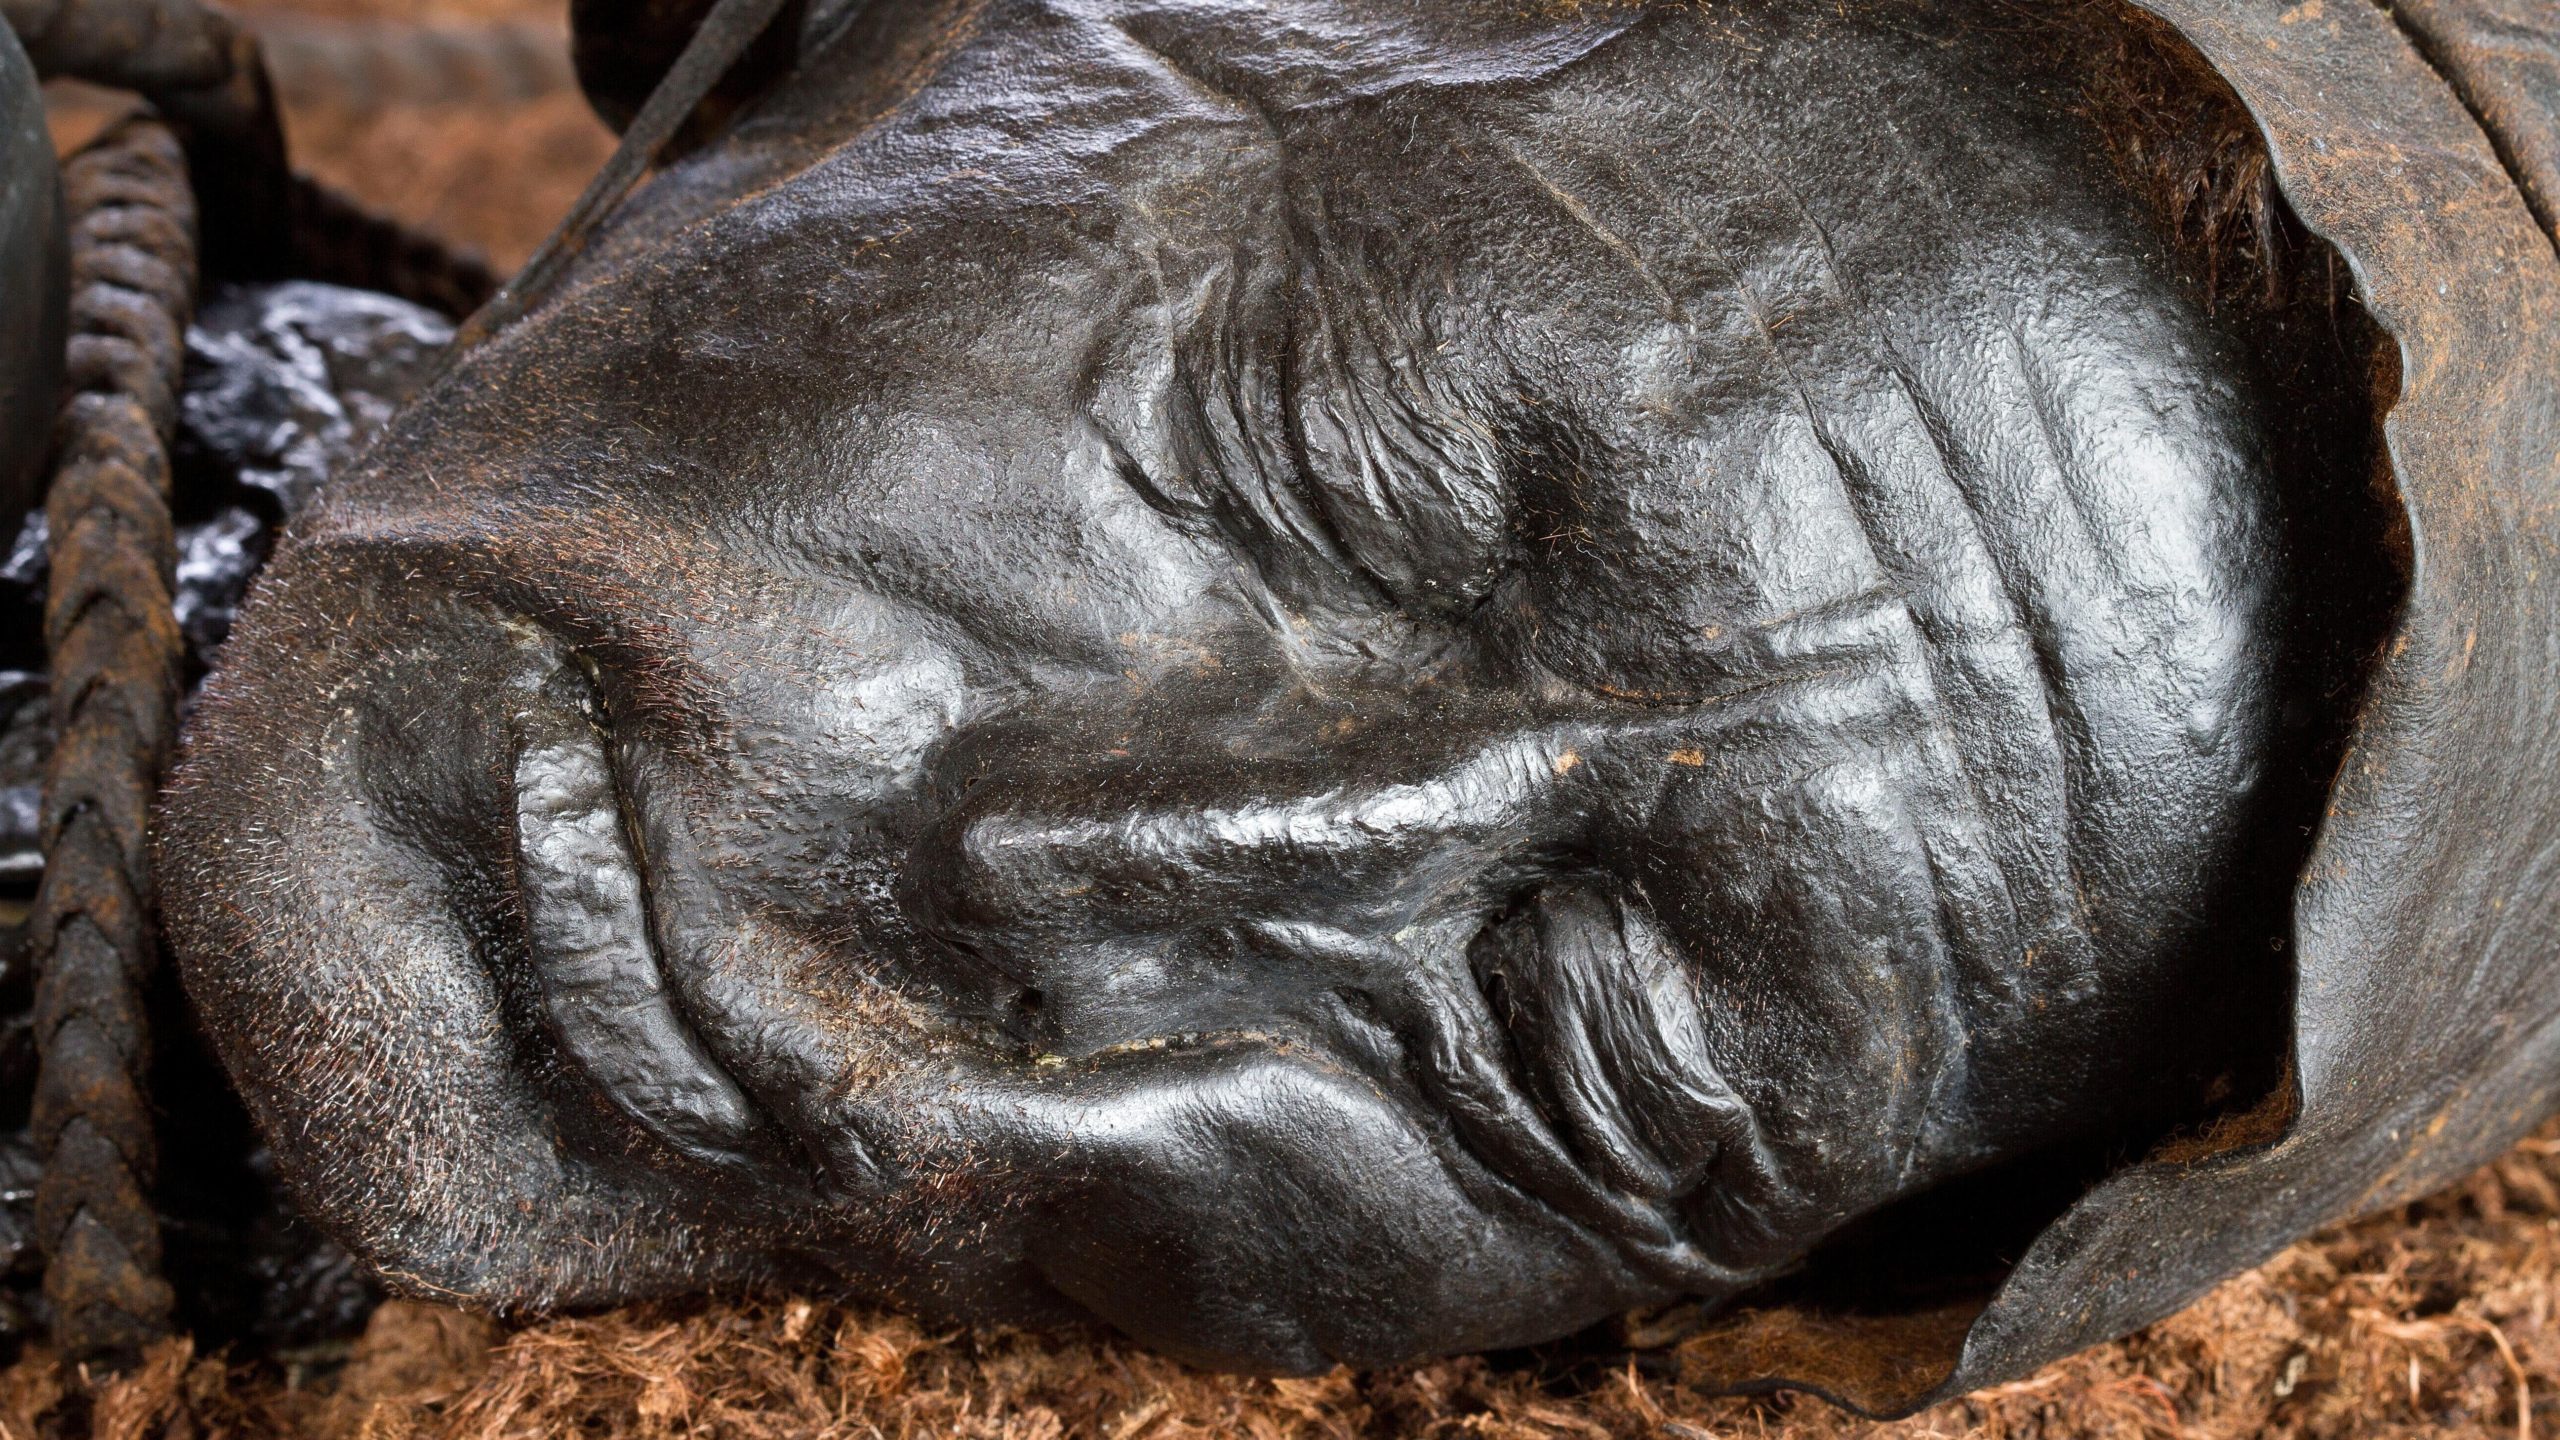 The incredibly well-preserved head of Tollund Man. (Image: A. Mikkelsen)